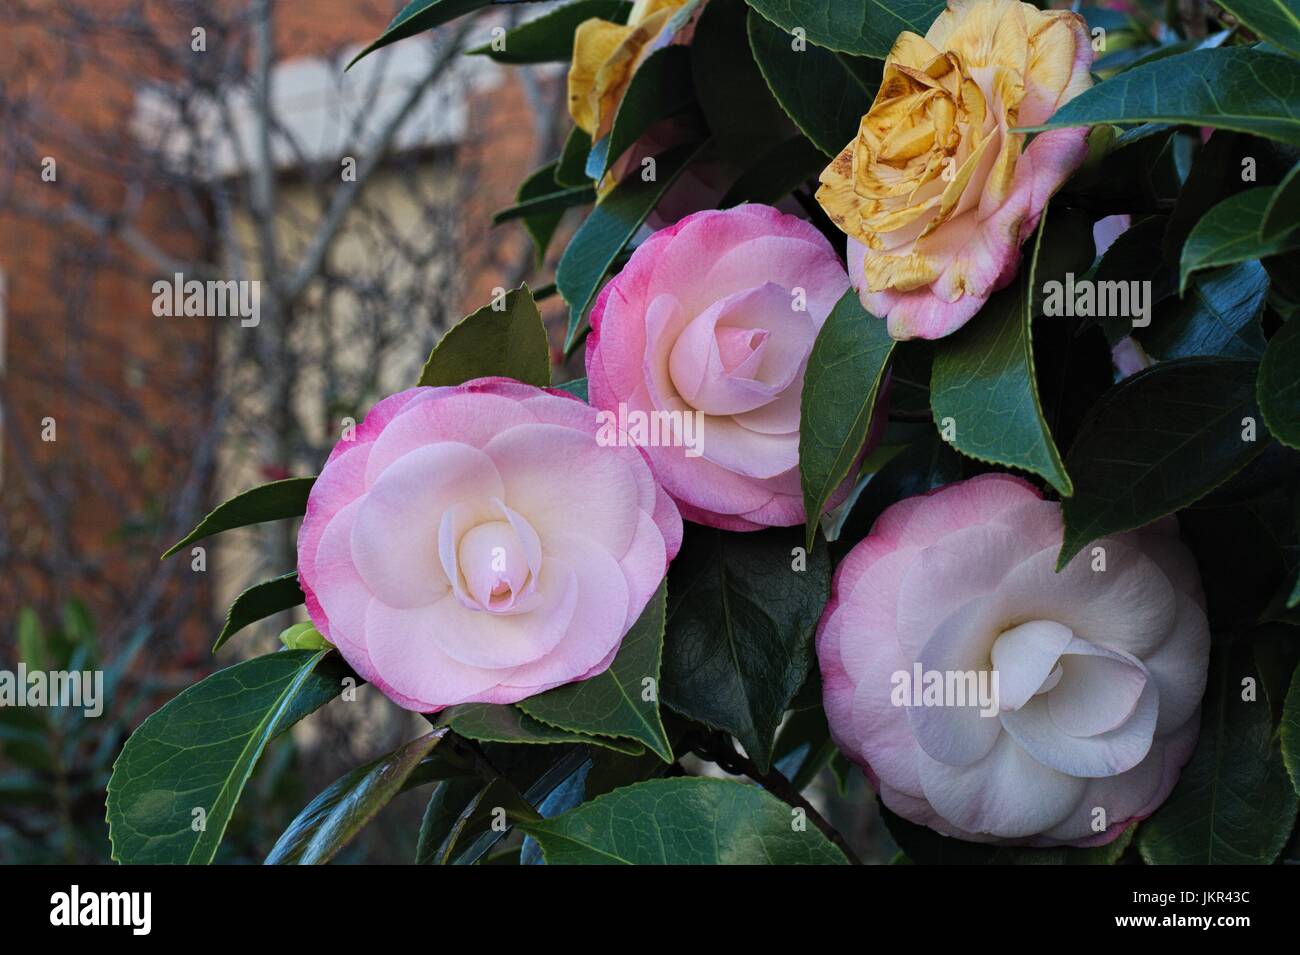 Pink tinged camellia flowers on a green leafed tree, brick house in the background. Stock Photo